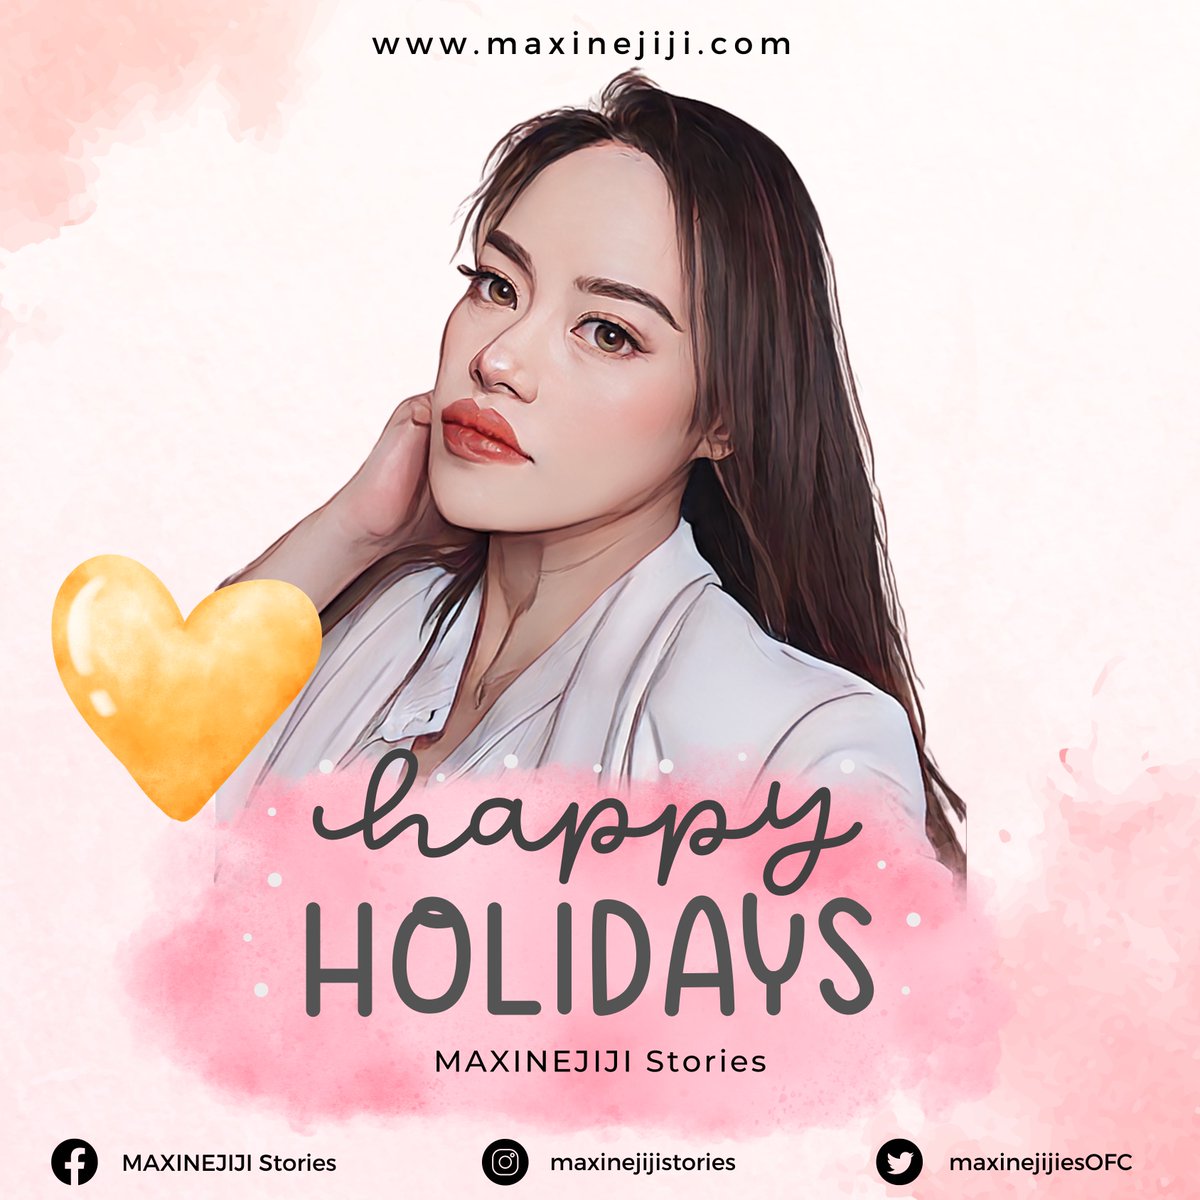 Happy Holidays, Jijies, and all the best to you in the year to come! - MAXINEJIJI Admins 🖤 #MAXINEJIJIStories | @maxinejiji